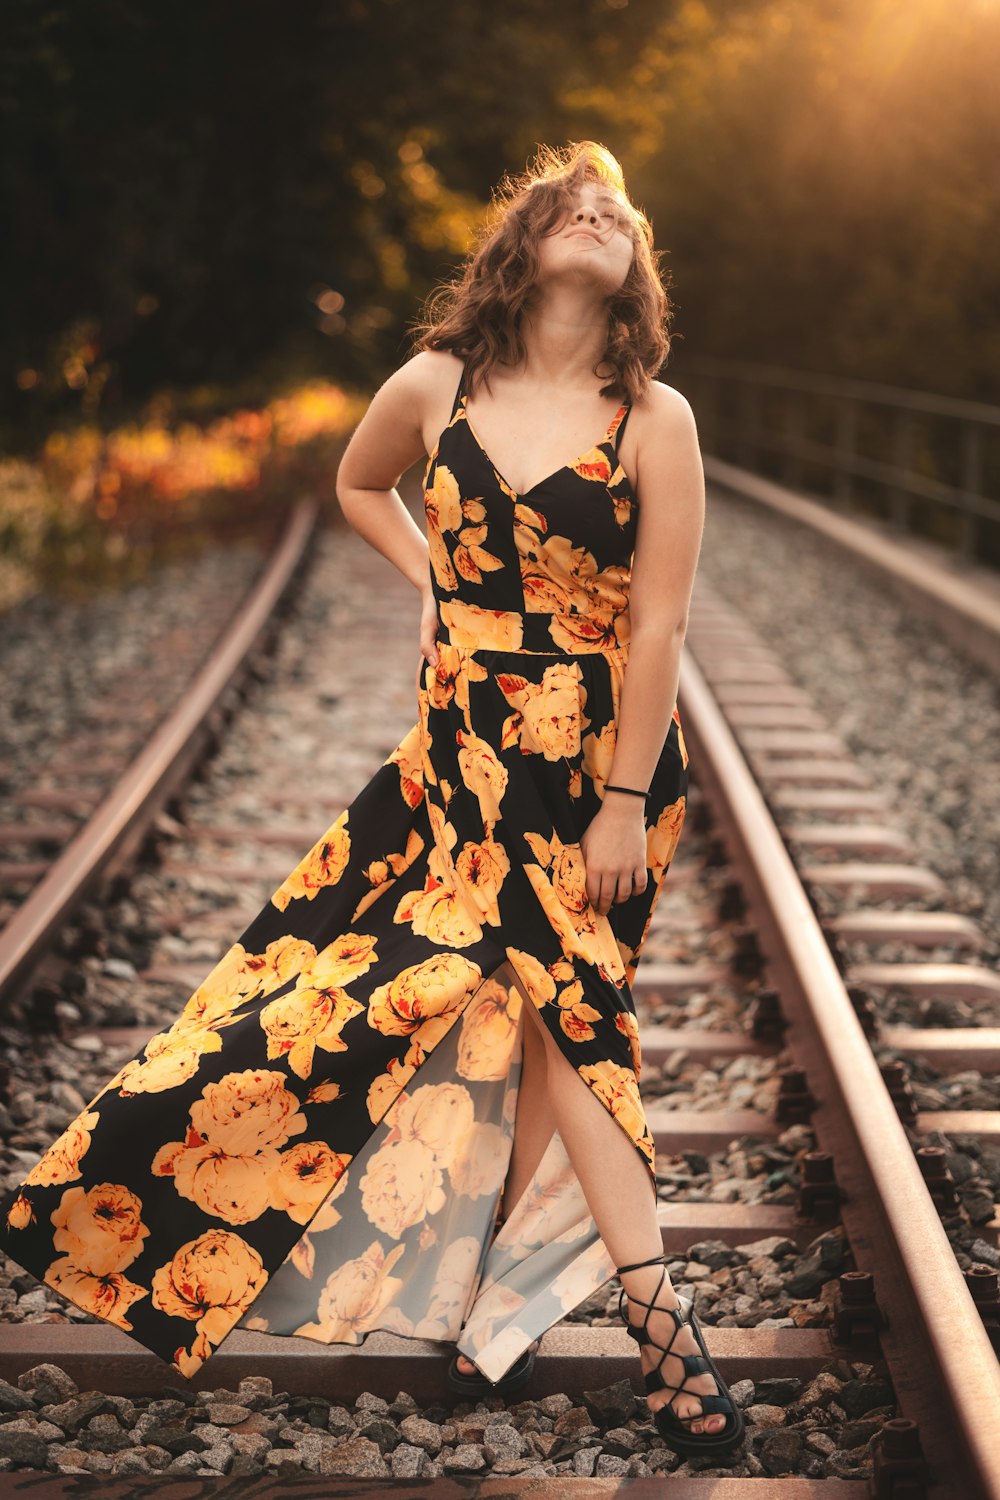 a woman in a dress standing on train tracks